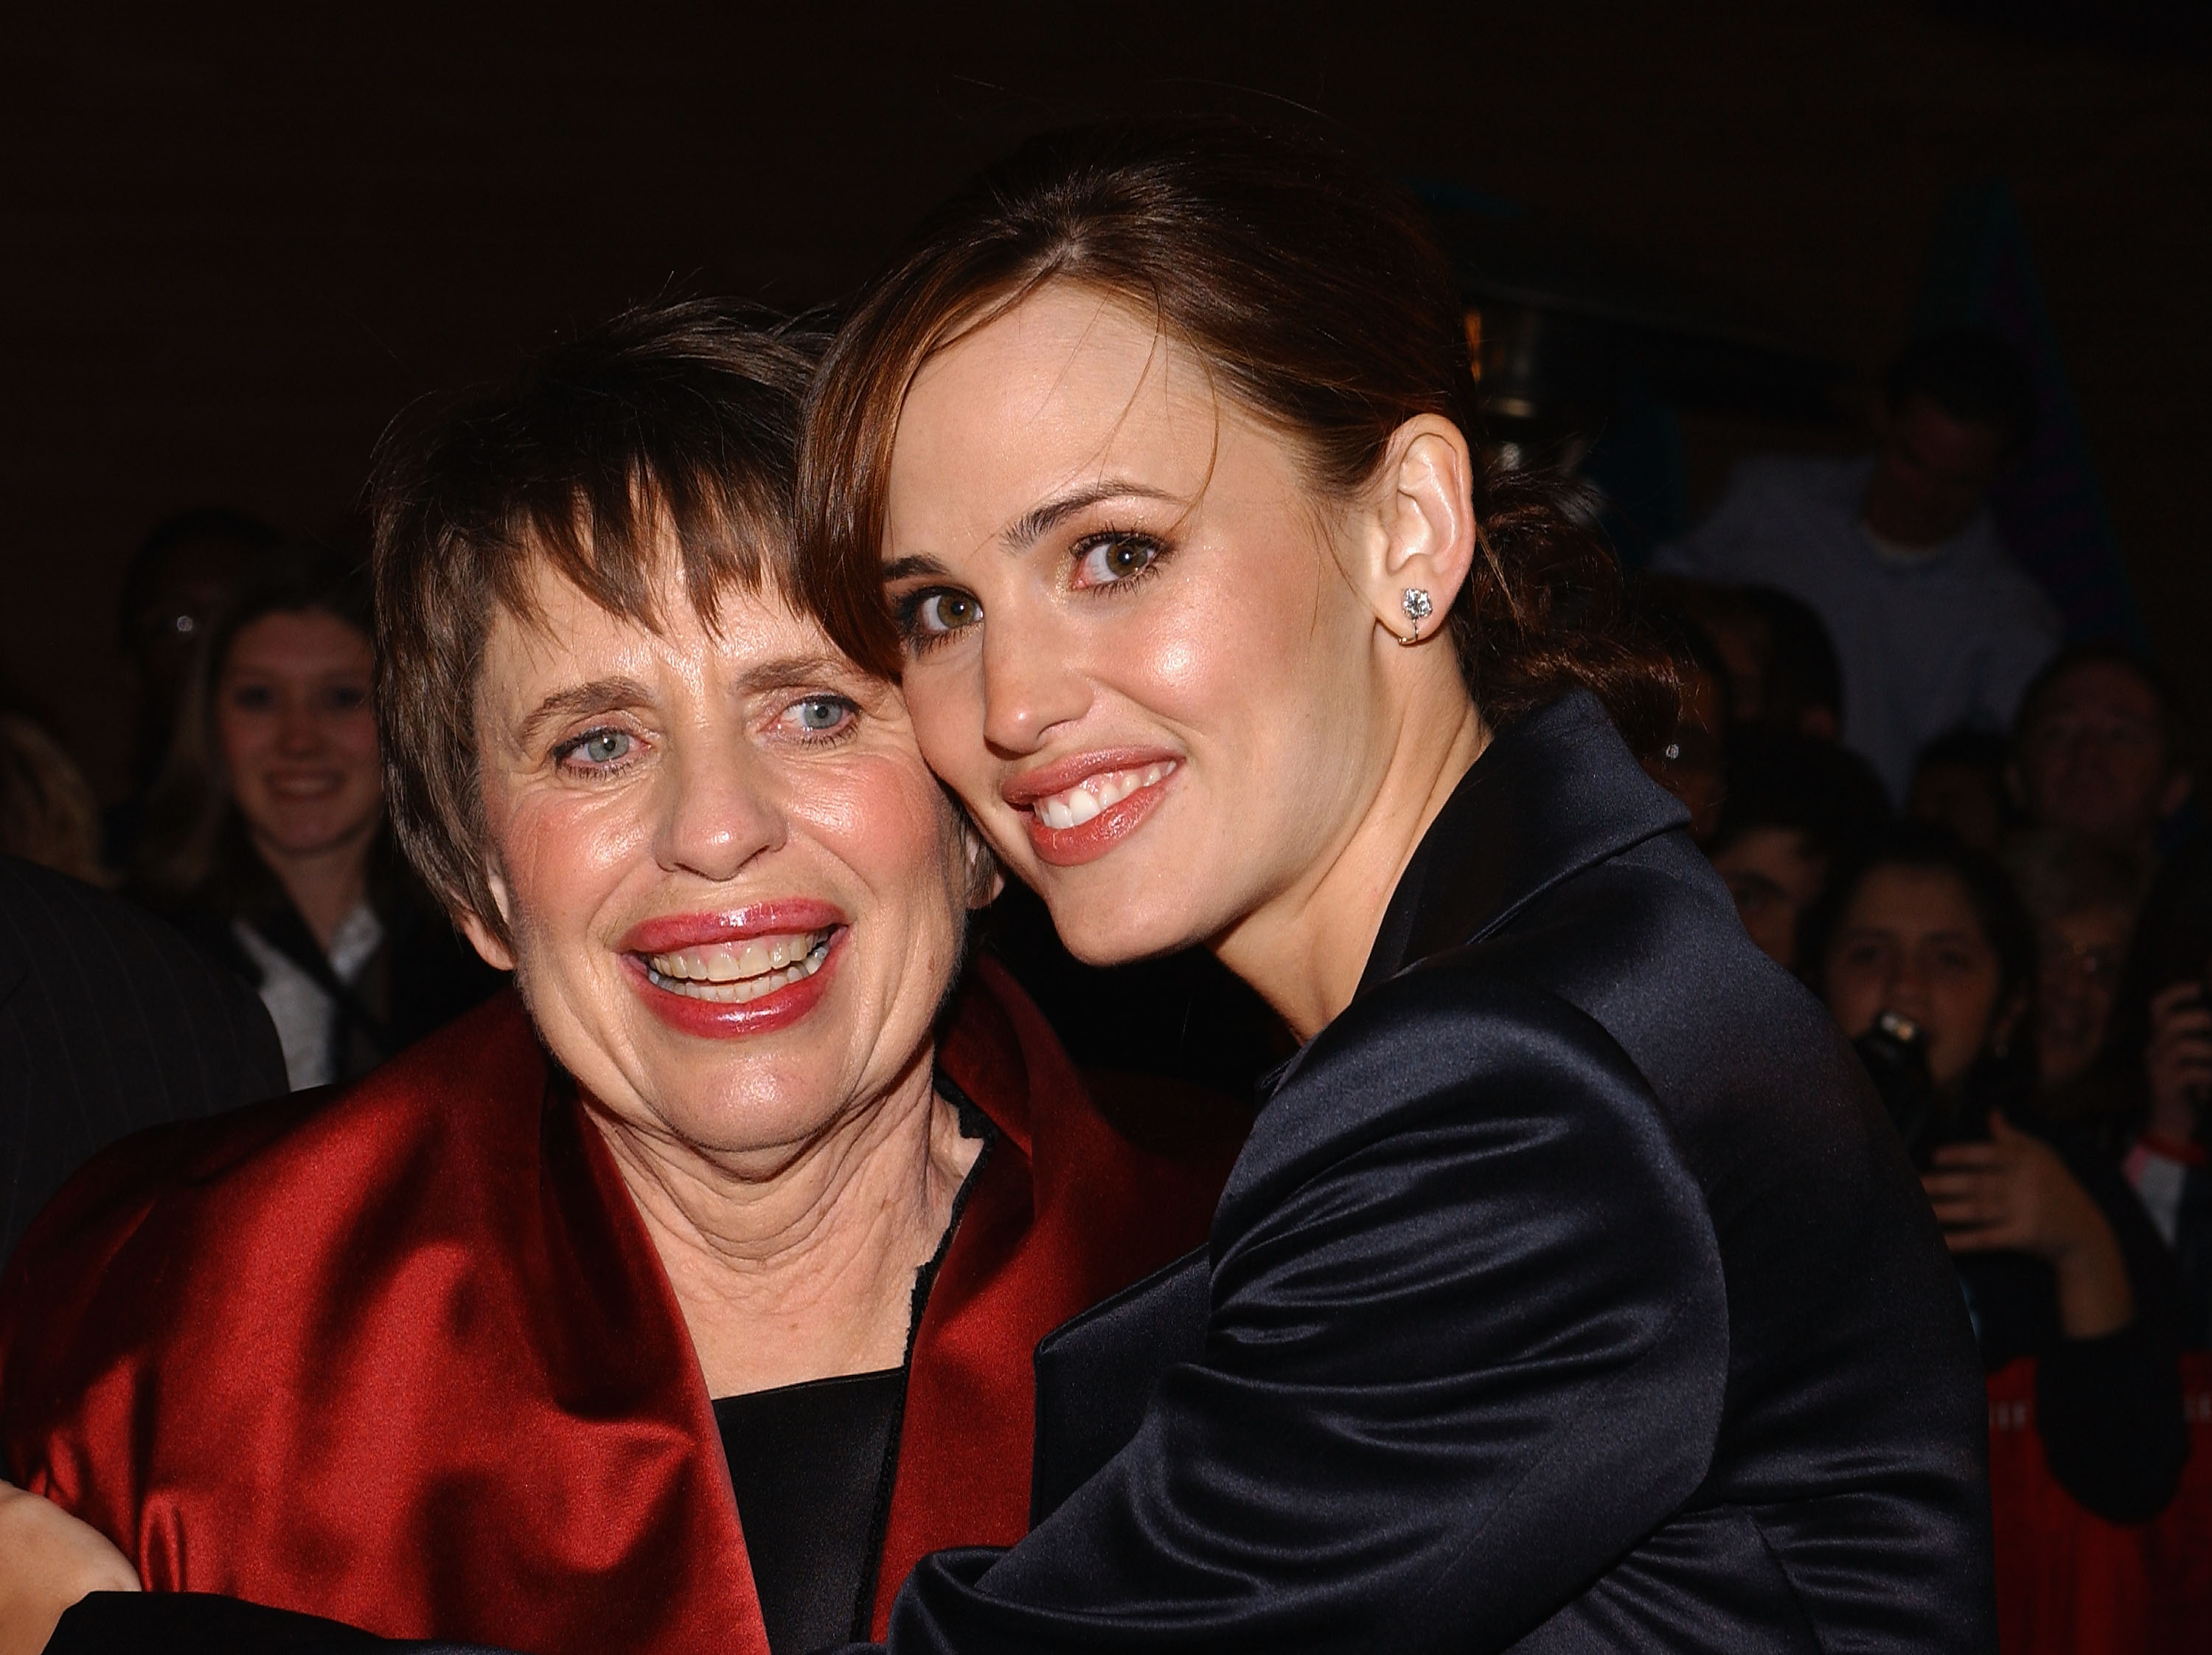 Actress Jennifer Garner and her mother attend the premiere of Twentieth Century Fox and Regency Enterprises' "Elektra" at the Palms Casino on January 8, 2004, in Las Vegas, Nevada. | Source: Getty Images